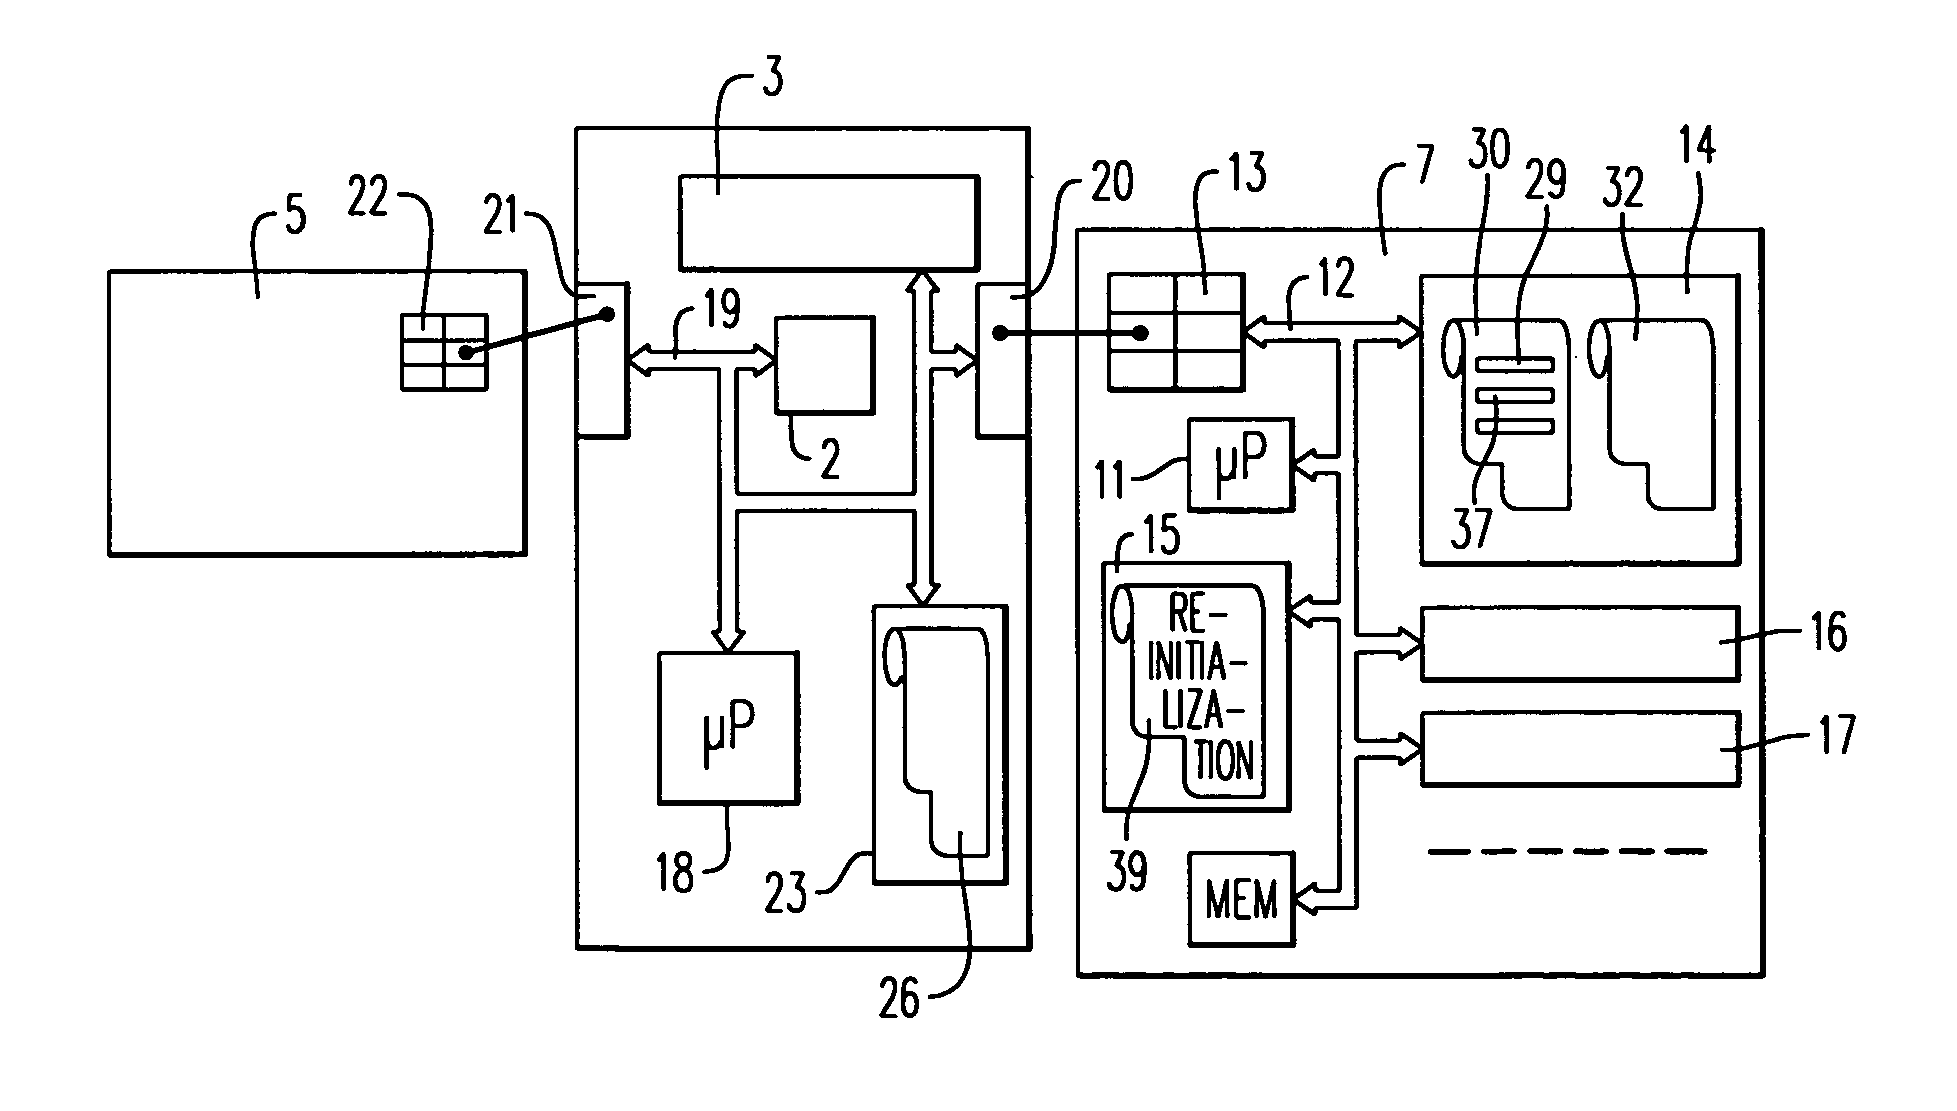 Method for managing a secure terminal